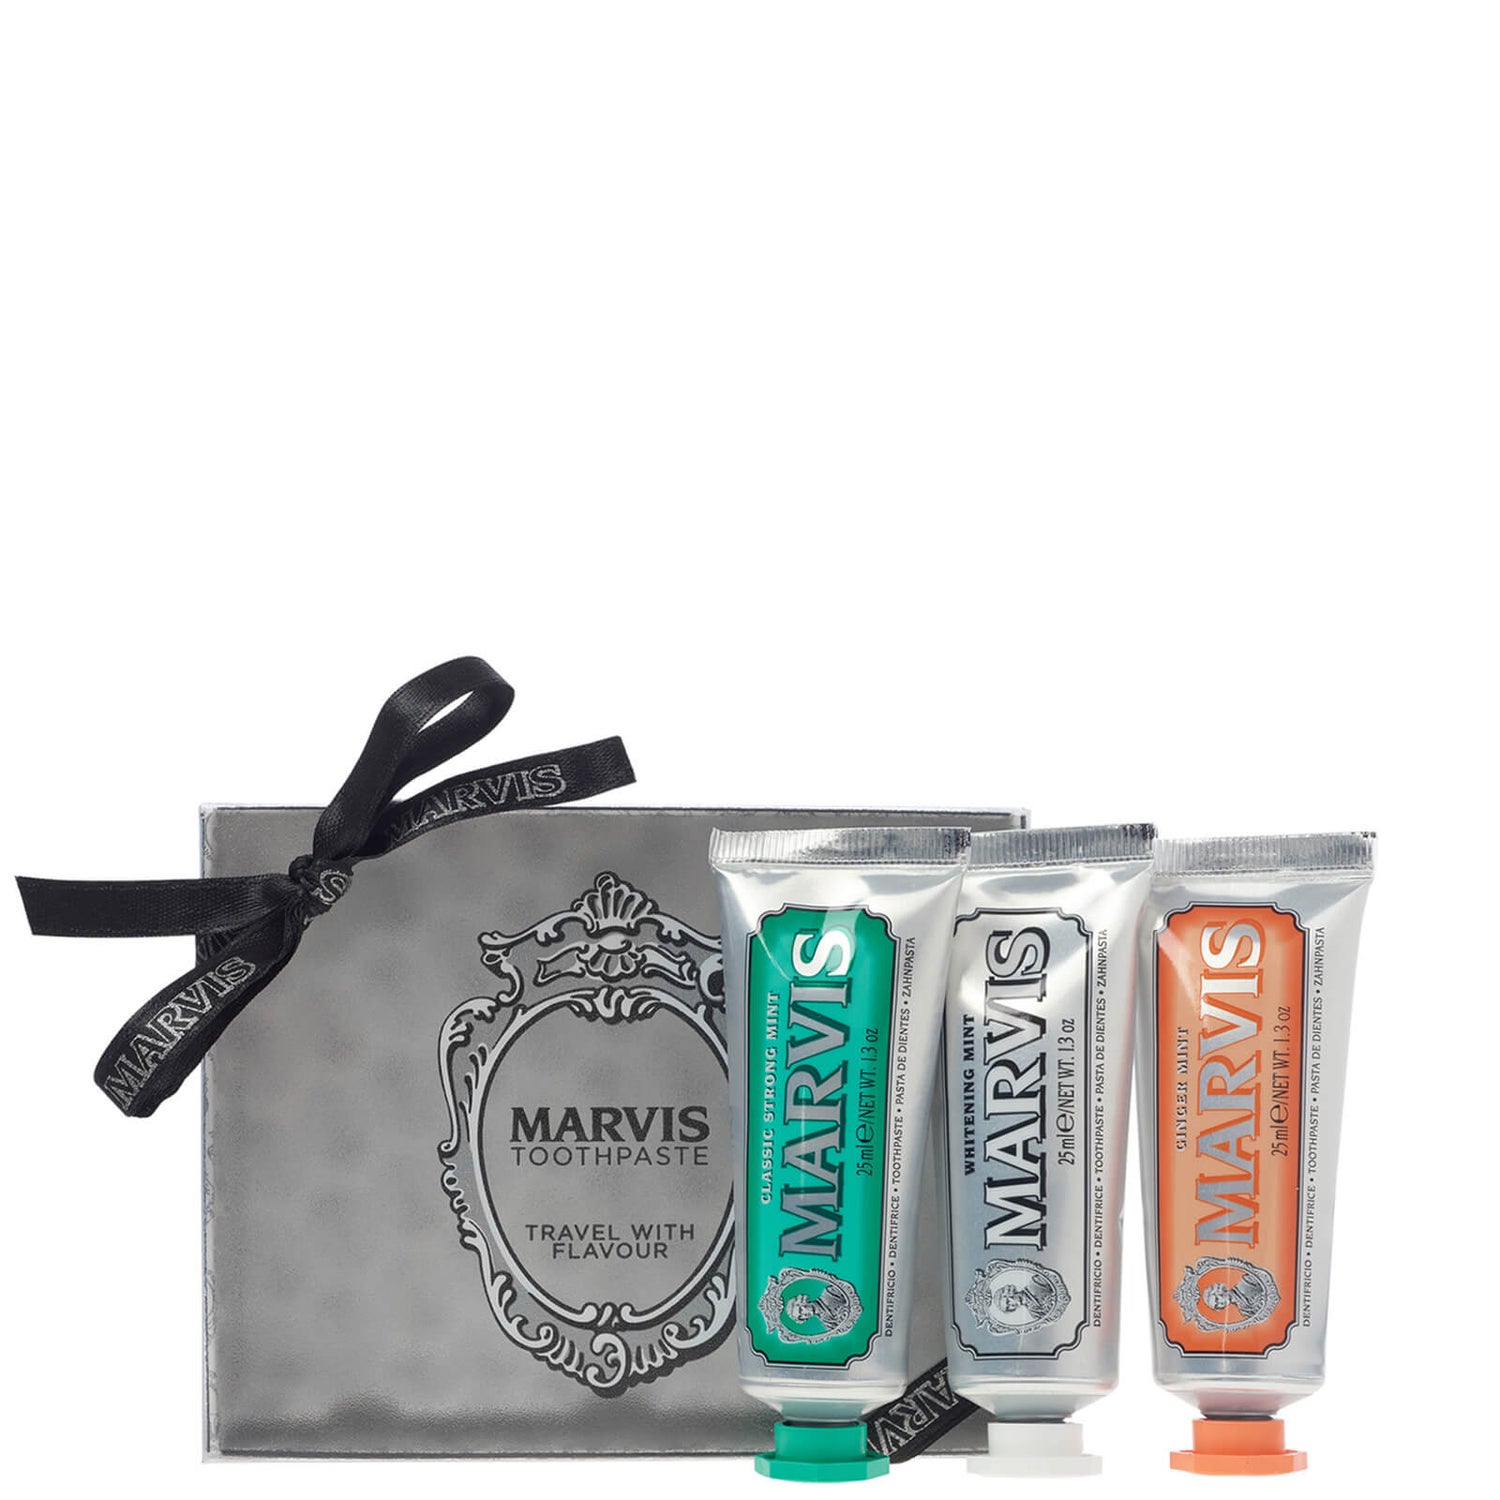 Marvis Travel with Flavour Set (3 piece - $19 Value)